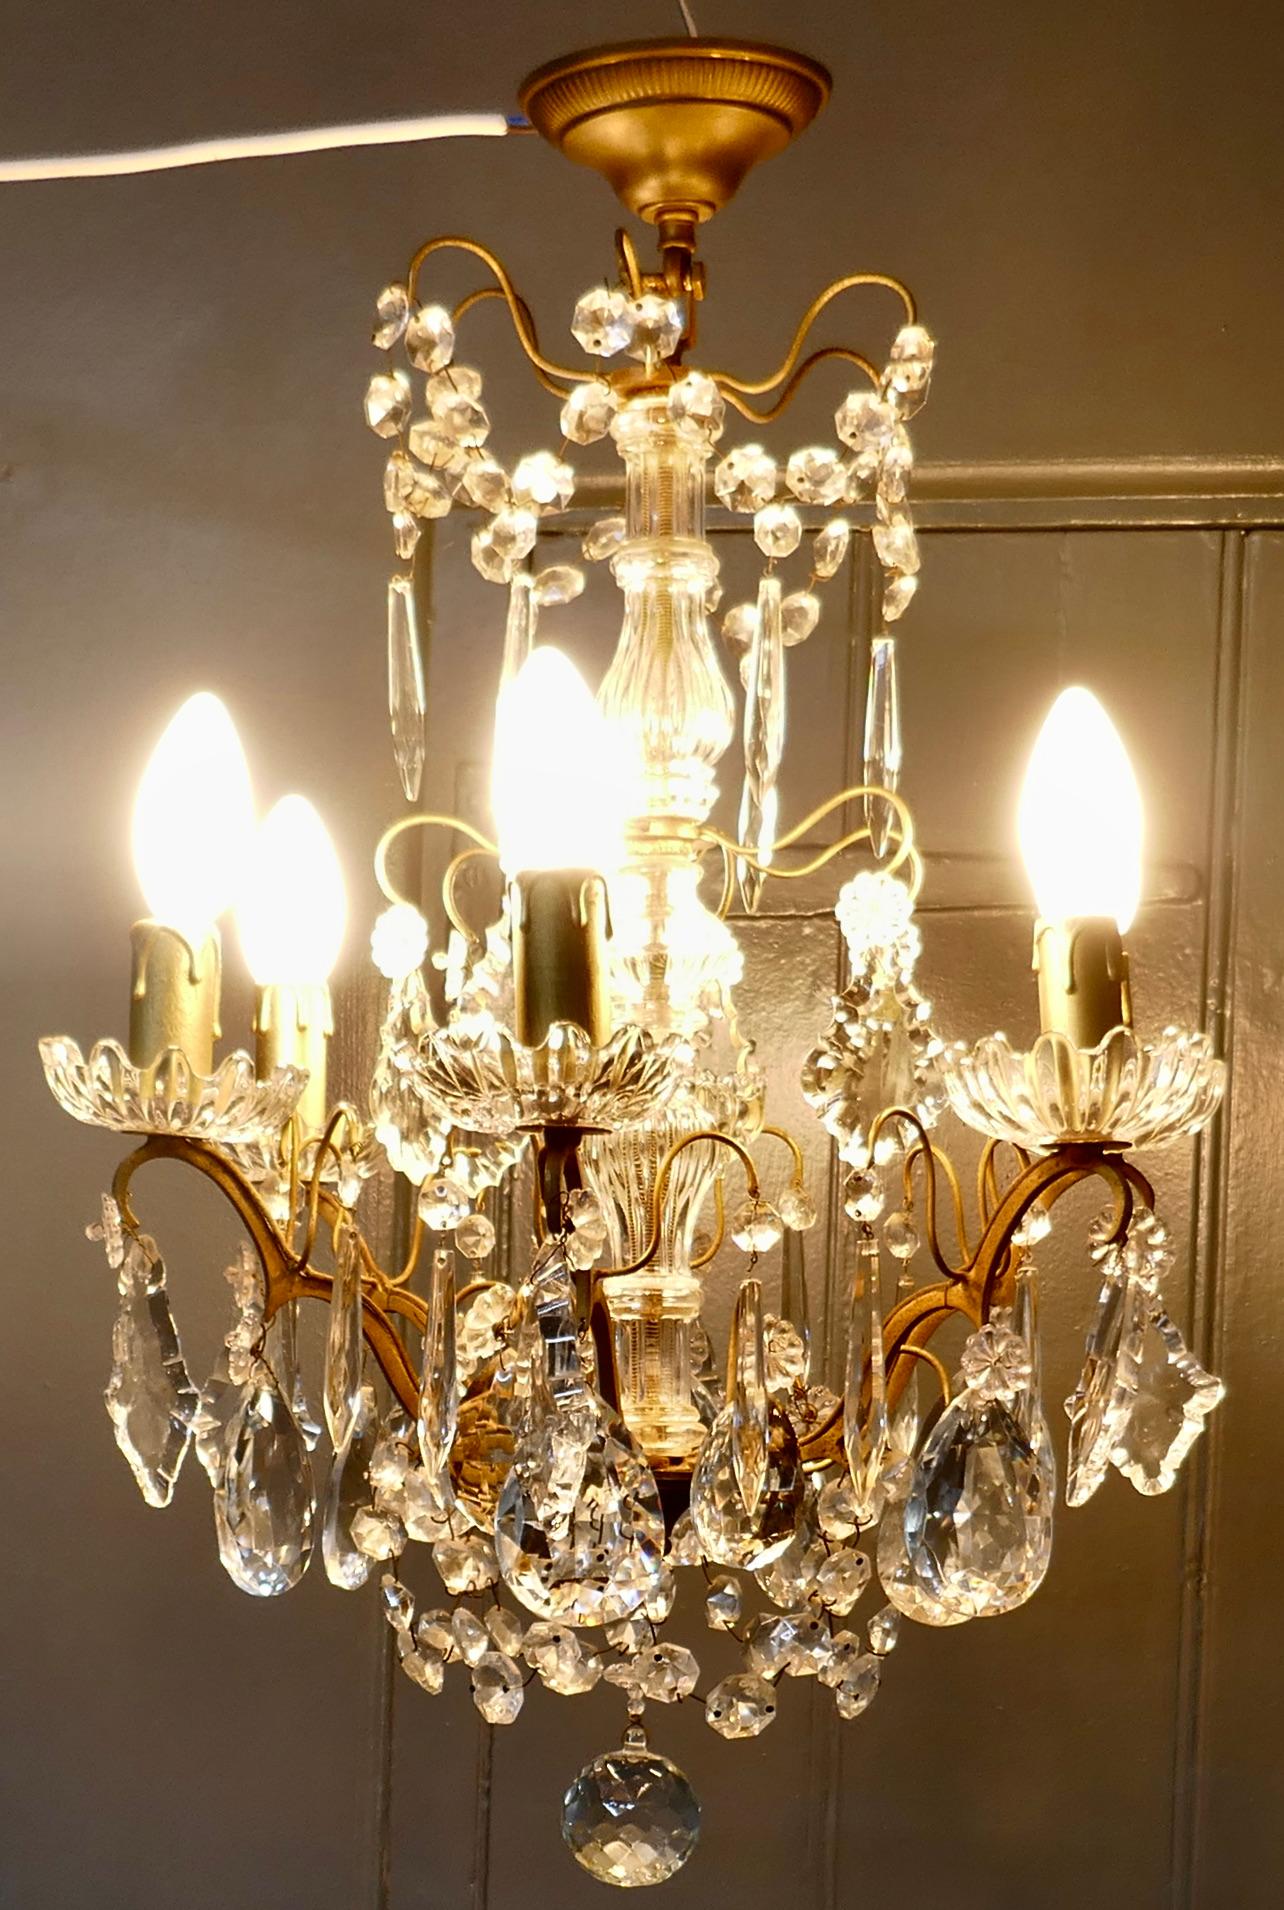 A Charming French Crystal 6 Branch Brass Chandelier

This is a superb brass chandelier, the brass has a gilded finish and the 6 arms have glass sconces which are hung with crystal chains, drops and pendants, in a variety of pretty shapes 

 The